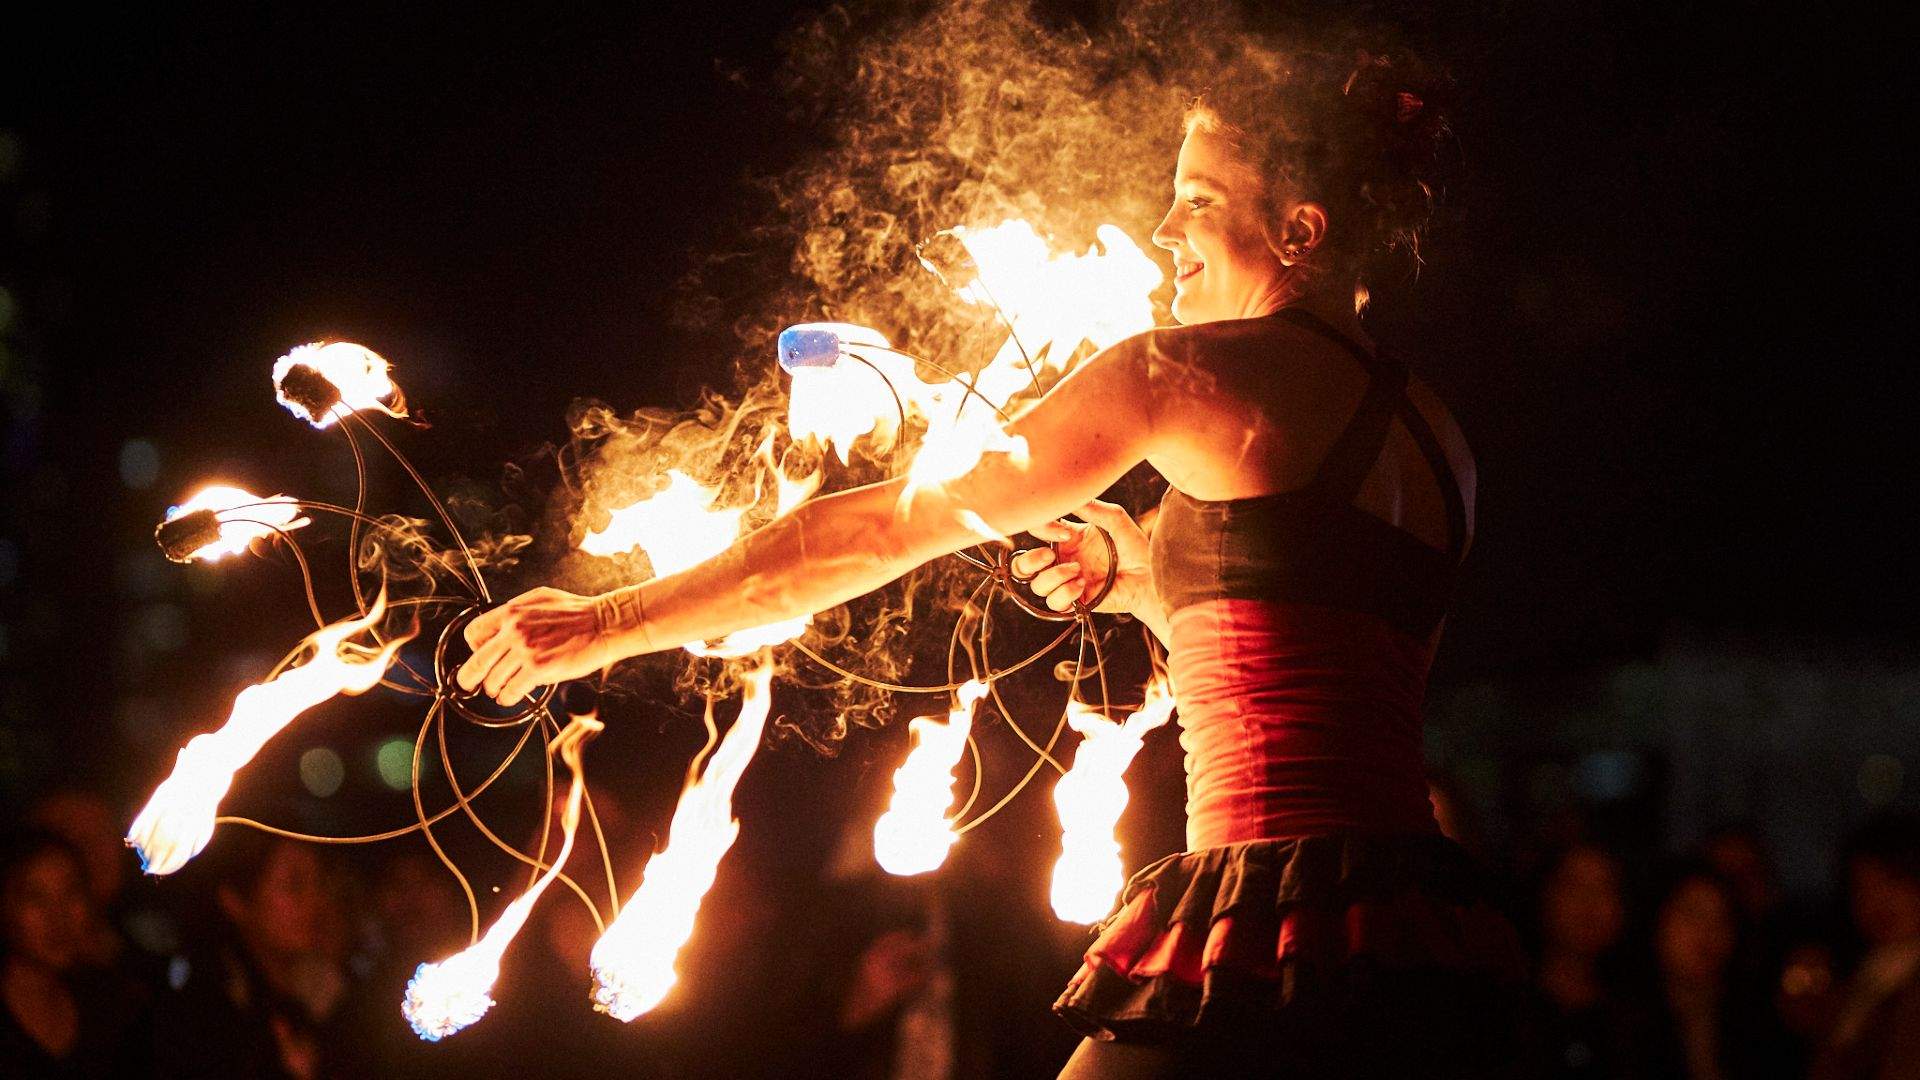 Docklands' After-Dark Arts Festival Firelight Returns for Three Fire-Filled Nights This July